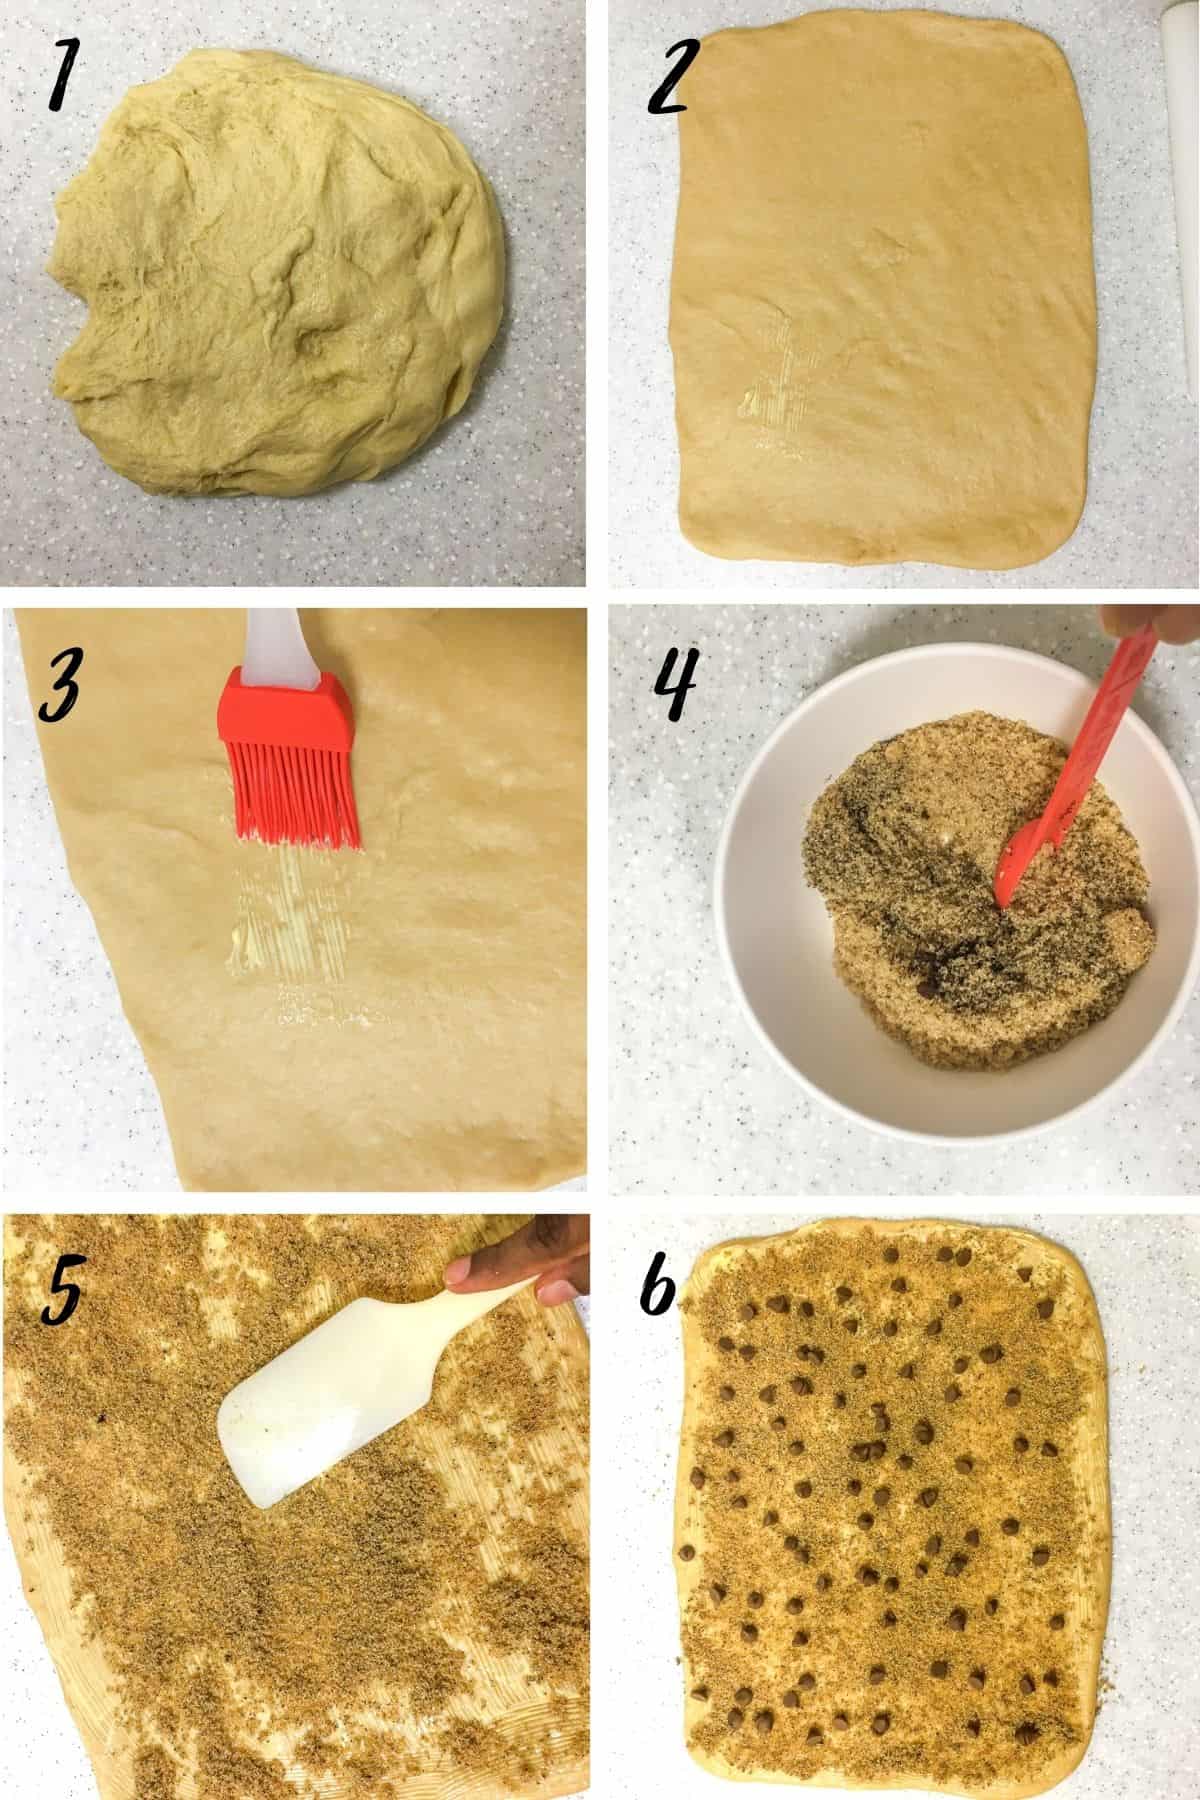 A poster of 6 images showing how to assemble roll dough.